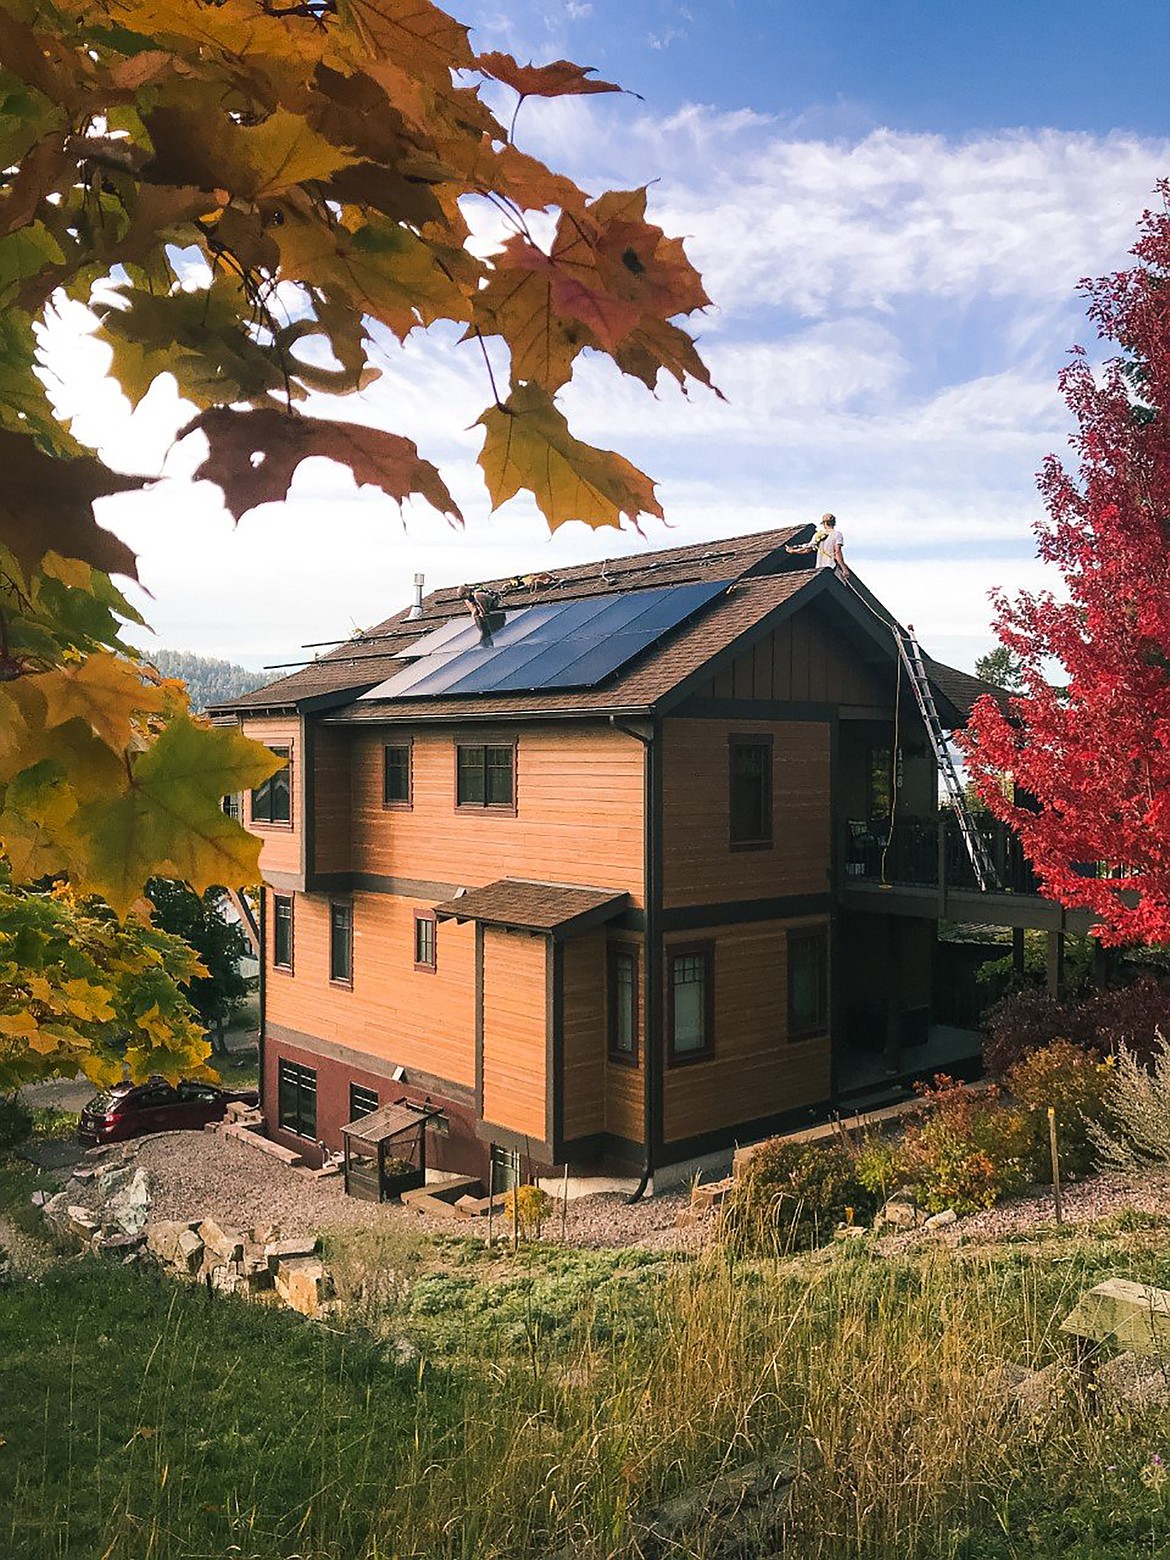 Northstone Solar installs panels atop a home in Whitefish. (Curran Edland photo)